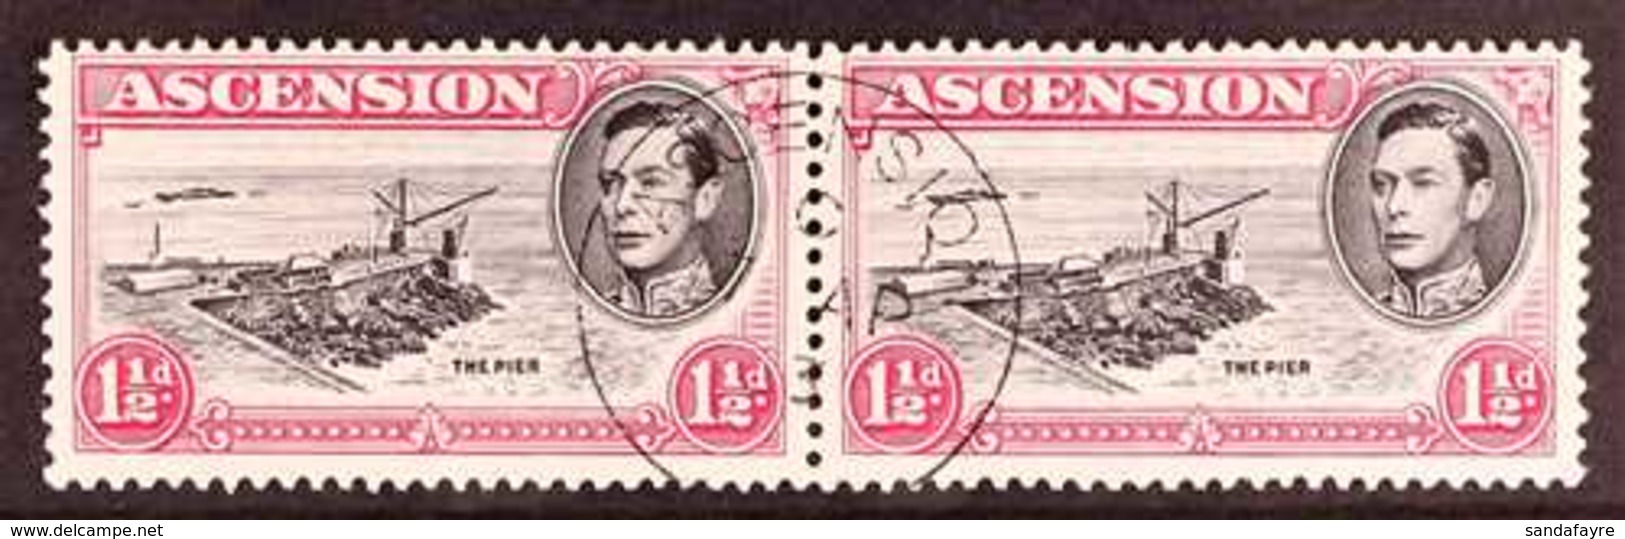 1953 1½d Black And Rose-carmine Perf. 13, Horizontal Pair With One Showing DAVIT FLAW, SG 40fa, Fine Central Cds Used, U - Ascension